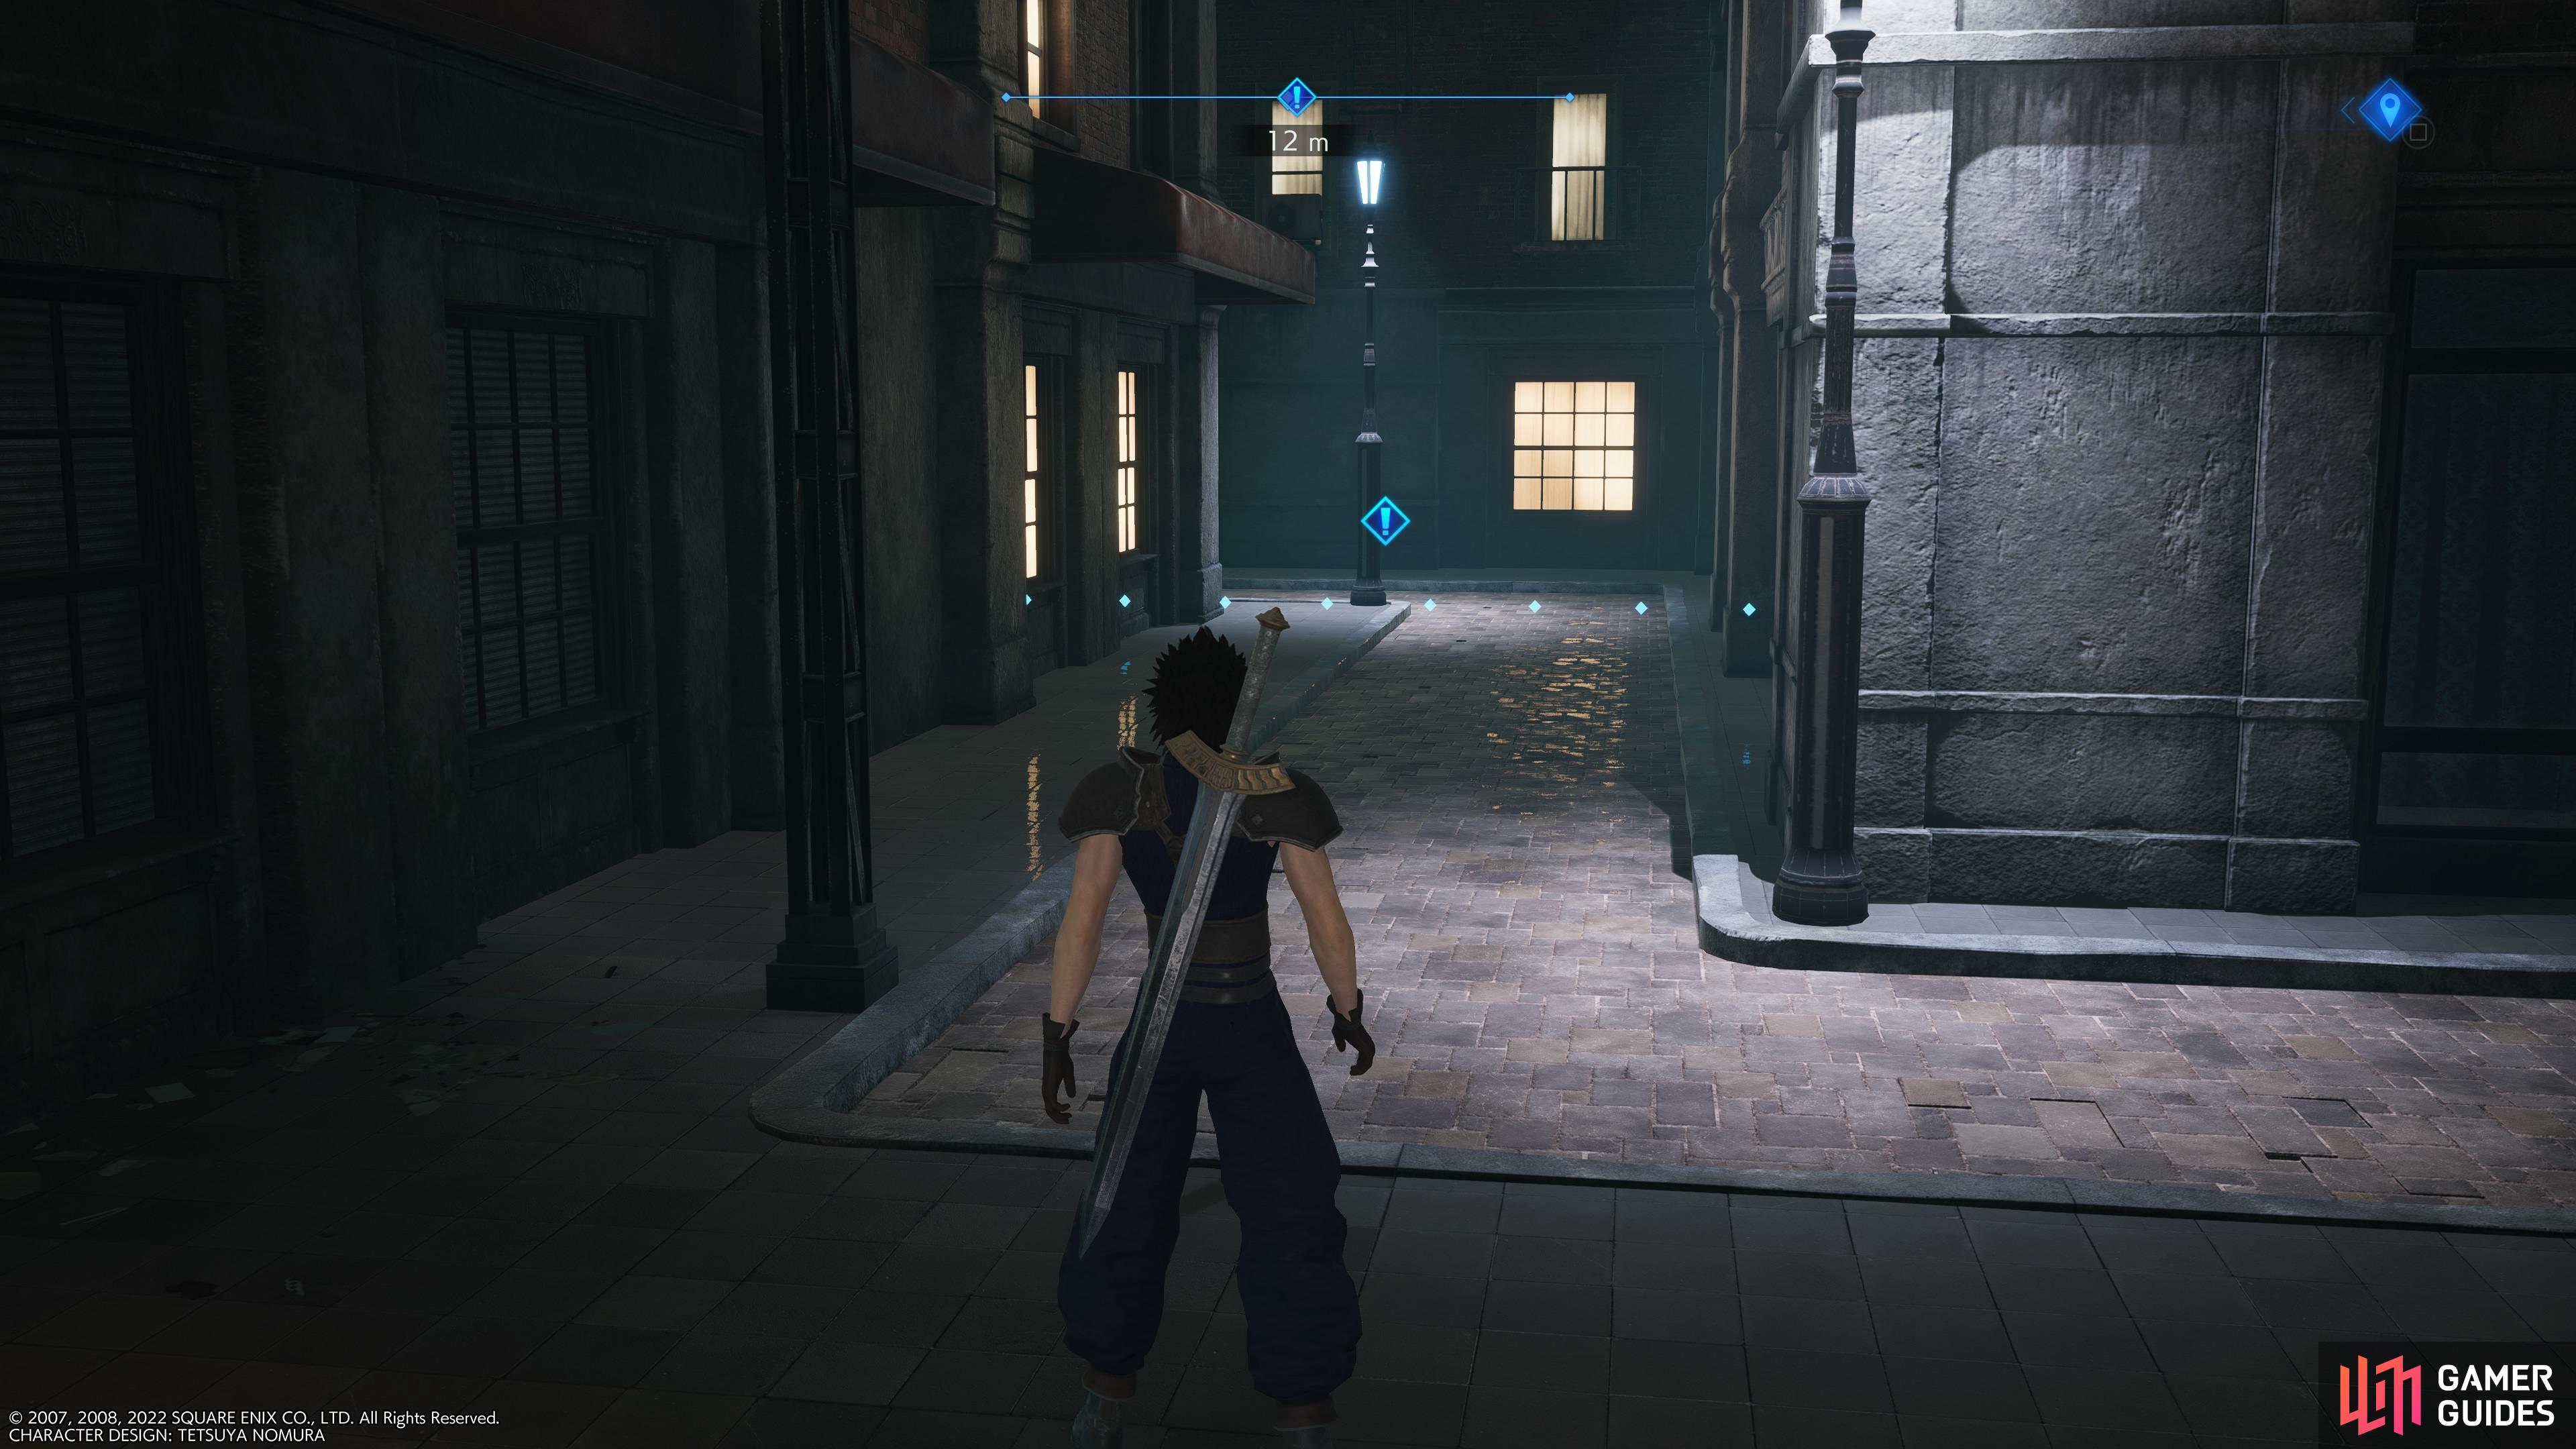 Go right down this alley to get back inside Shinra Building